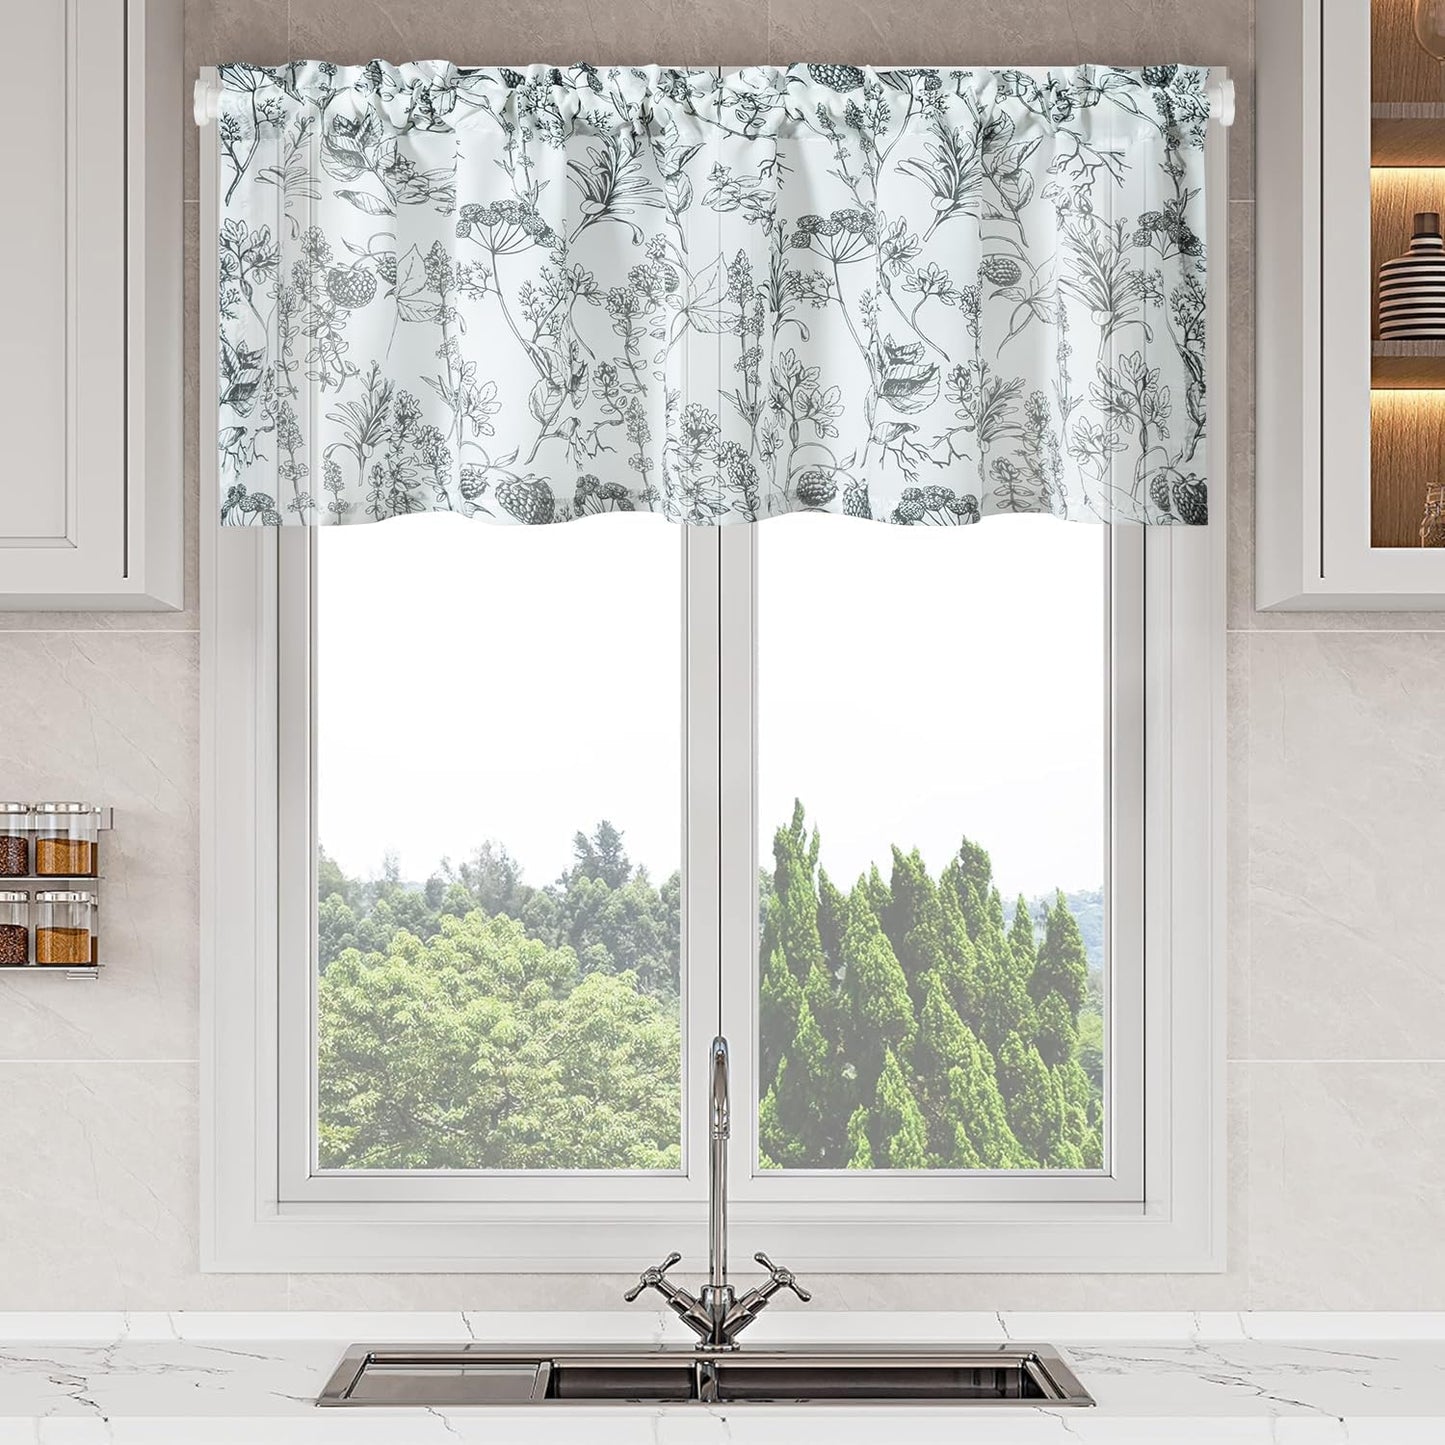 VOGOL Colorful Floral Print Tier Curtains, 2 Panels Smooth Textured Decorative Cafe Curtain, Rod Pocket Sheer Drapery for Farmhouse, W 30 X L 24  VOGOL Mn010 W52 X L18 